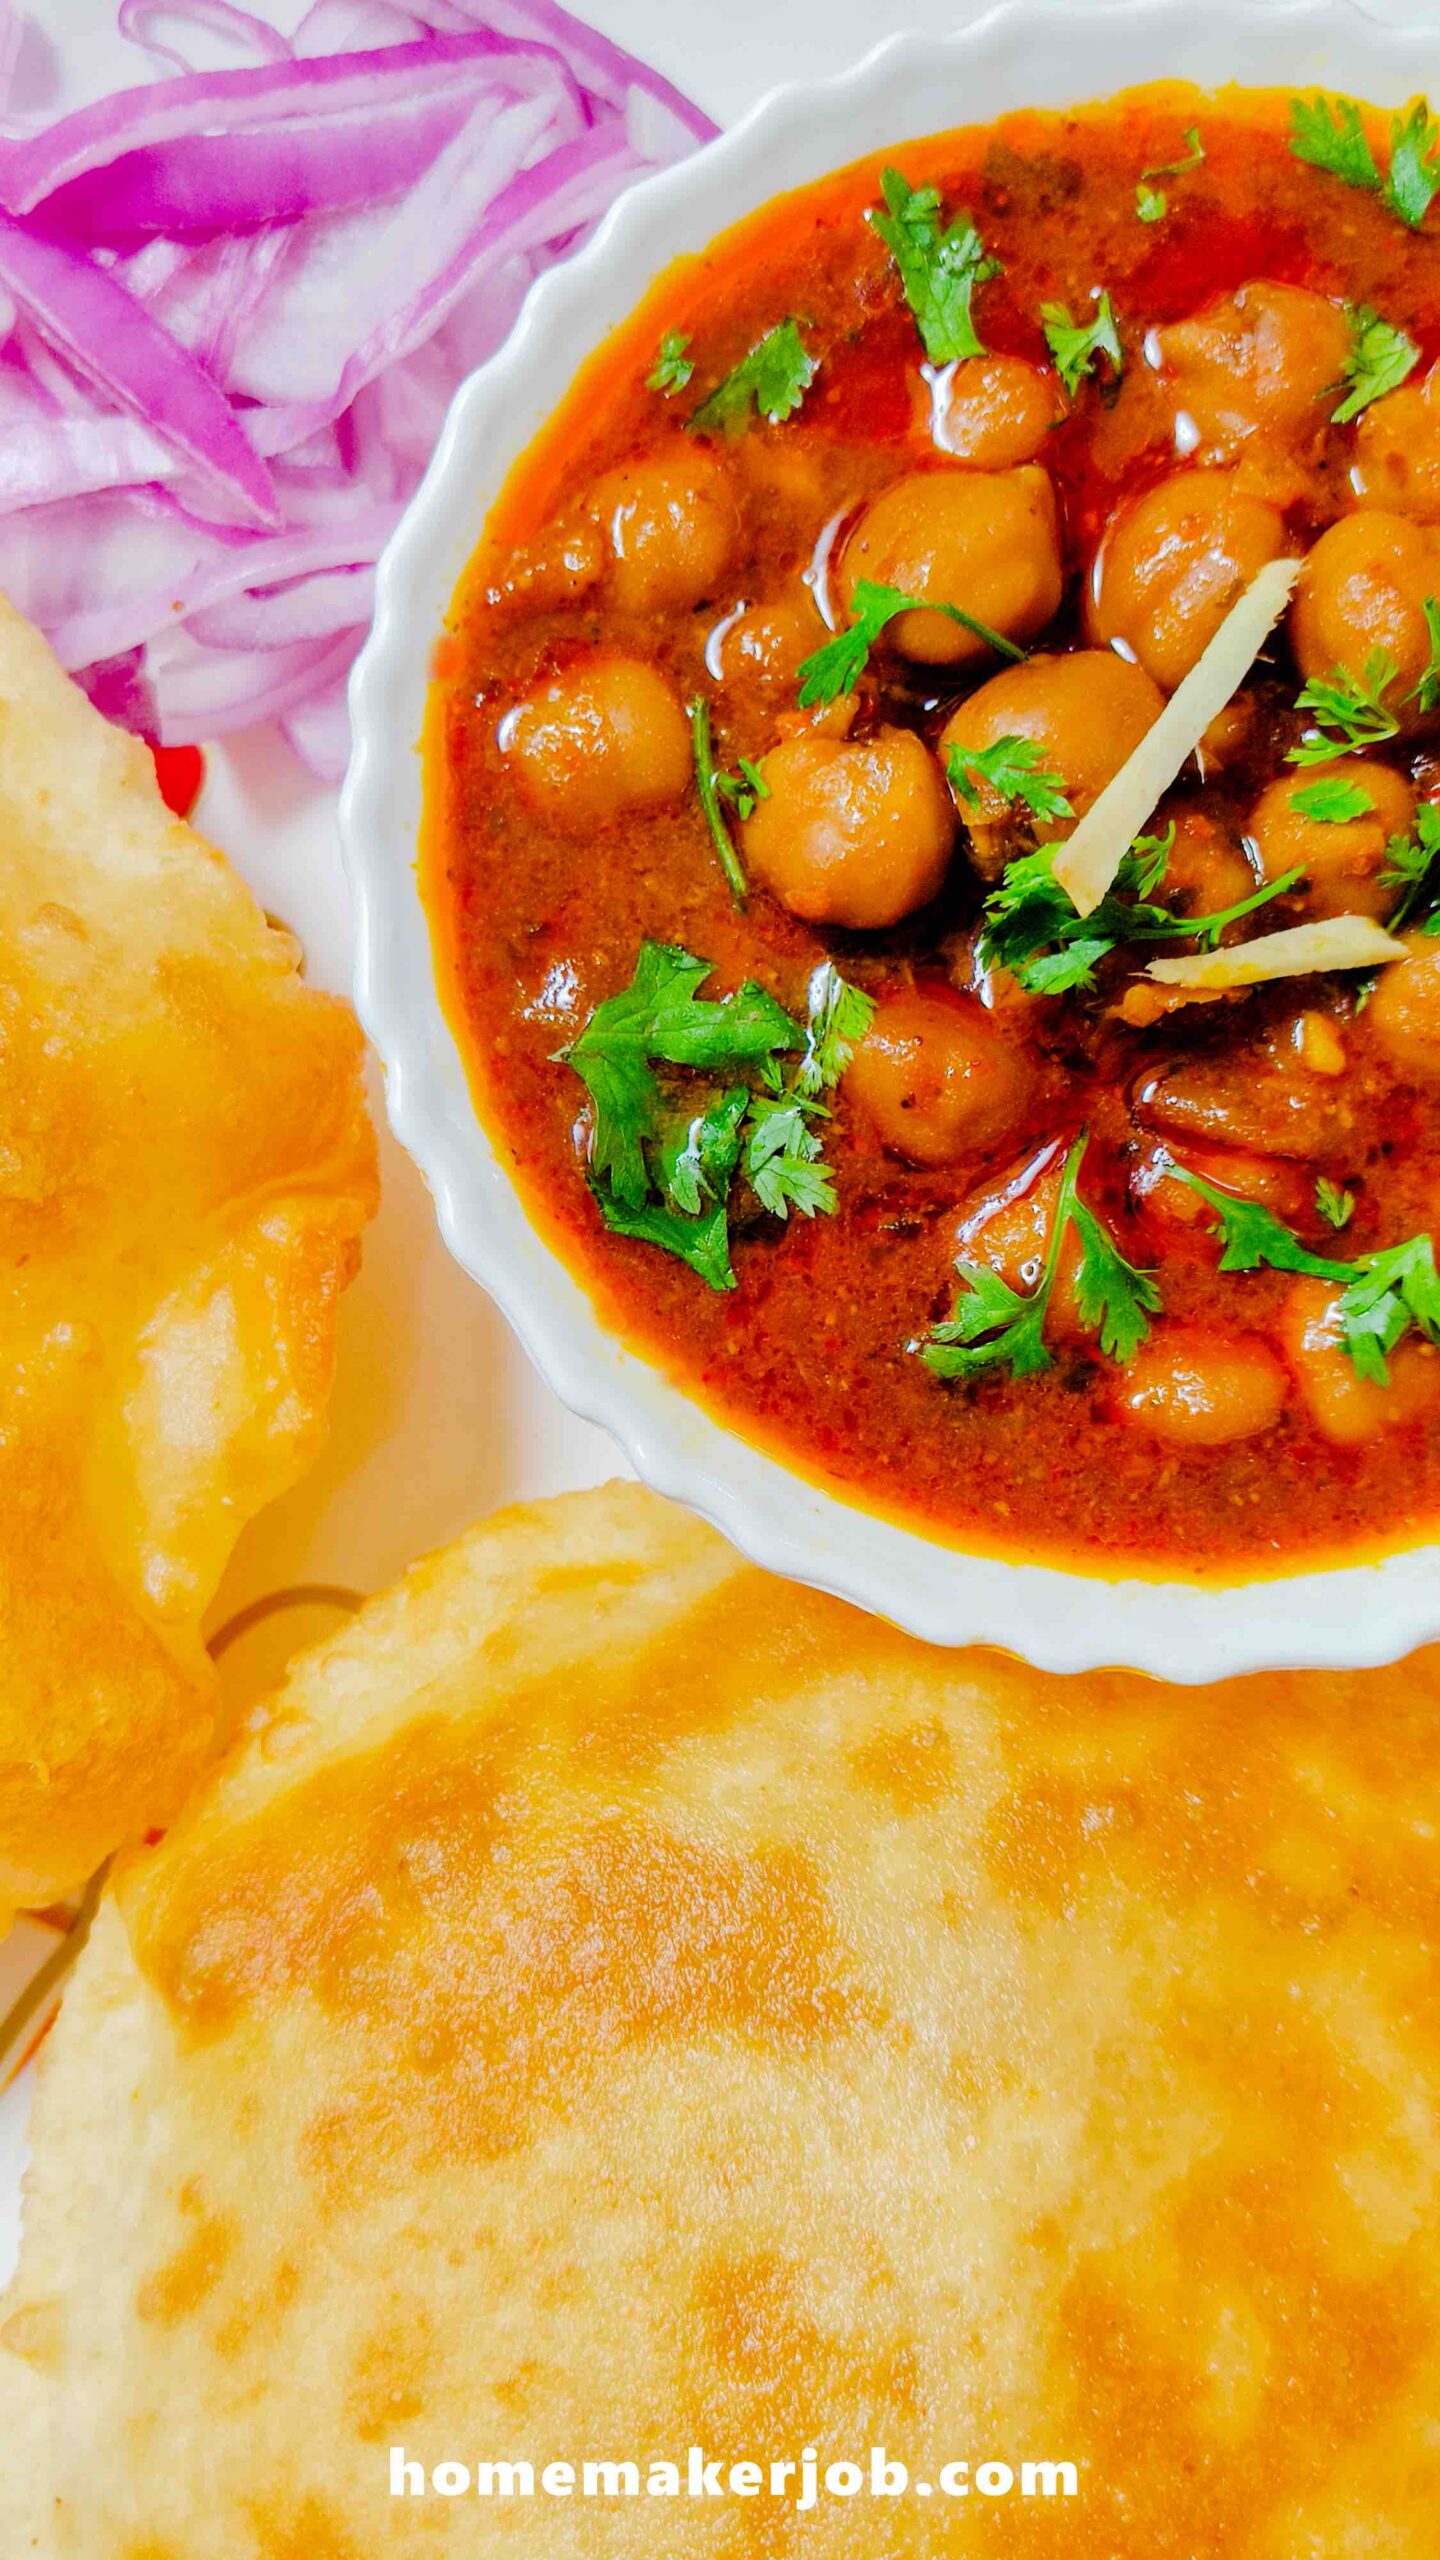 Chhole served hot with bhature and red onions in a white dish, by homemakerjob.com